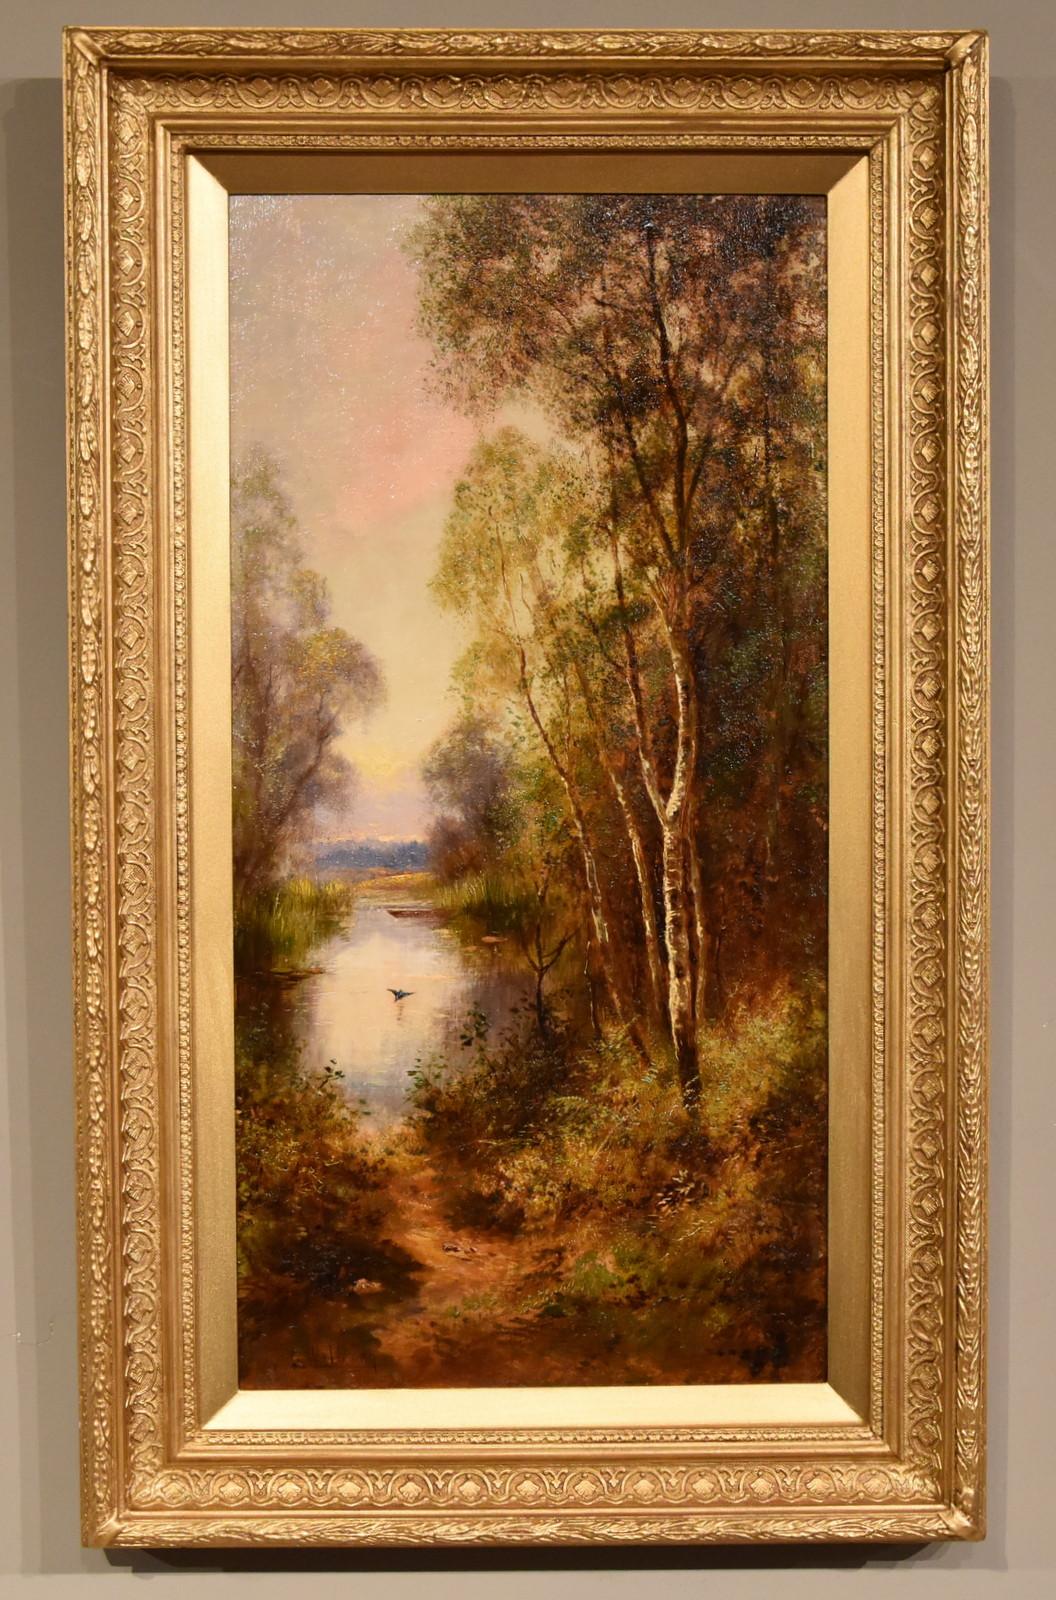 Oil Painting Pair by Ernest Charles Walbourn “A Tranquil River Scene” and 1872-1927.Walbourn was a popular painter of rural and highland landscapes. Regular exhibitor at the Royal Academy and Royal Society of British Artist. Oil on canvas.